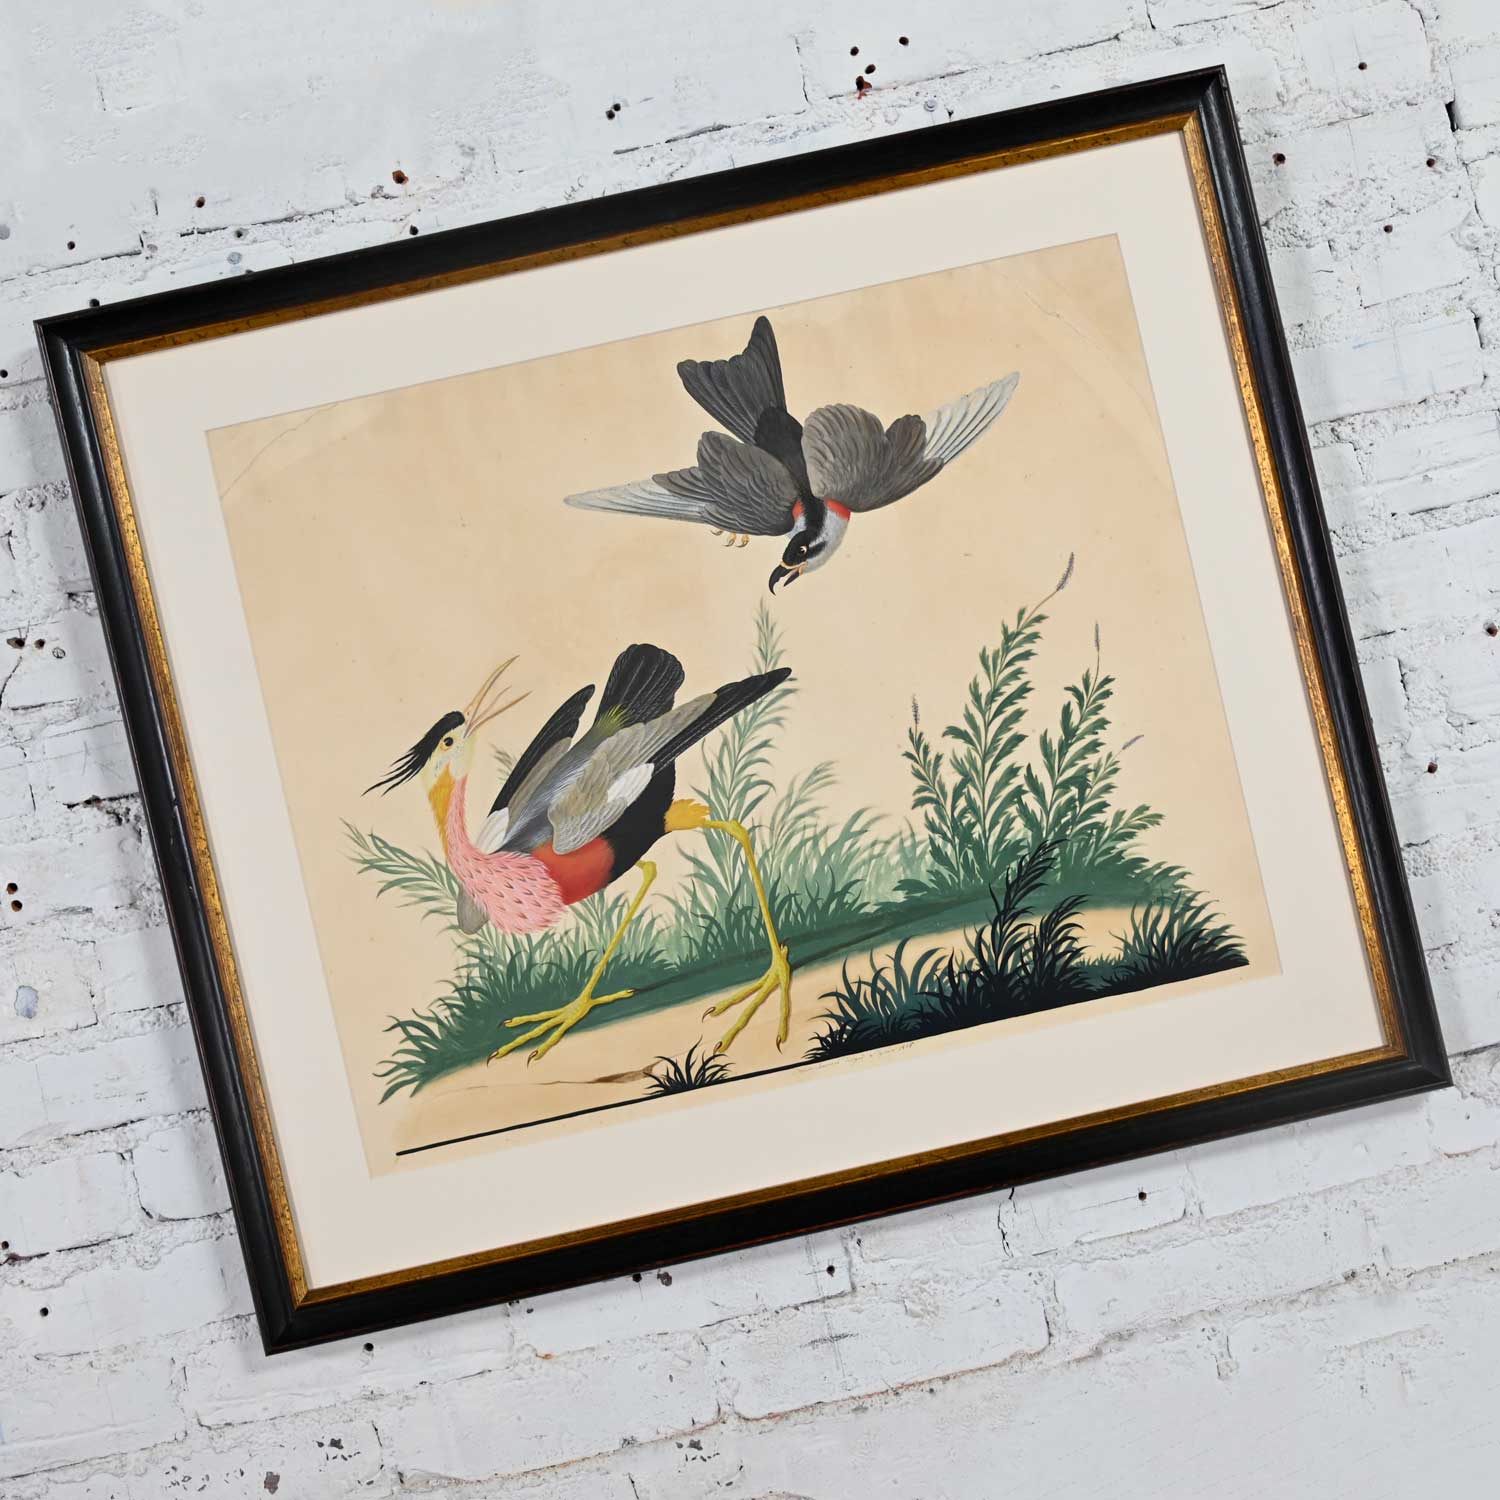 Vintage Vittorio Raineri Authentic Signed Watercolor Painting of Exotic Birds Dated 1836